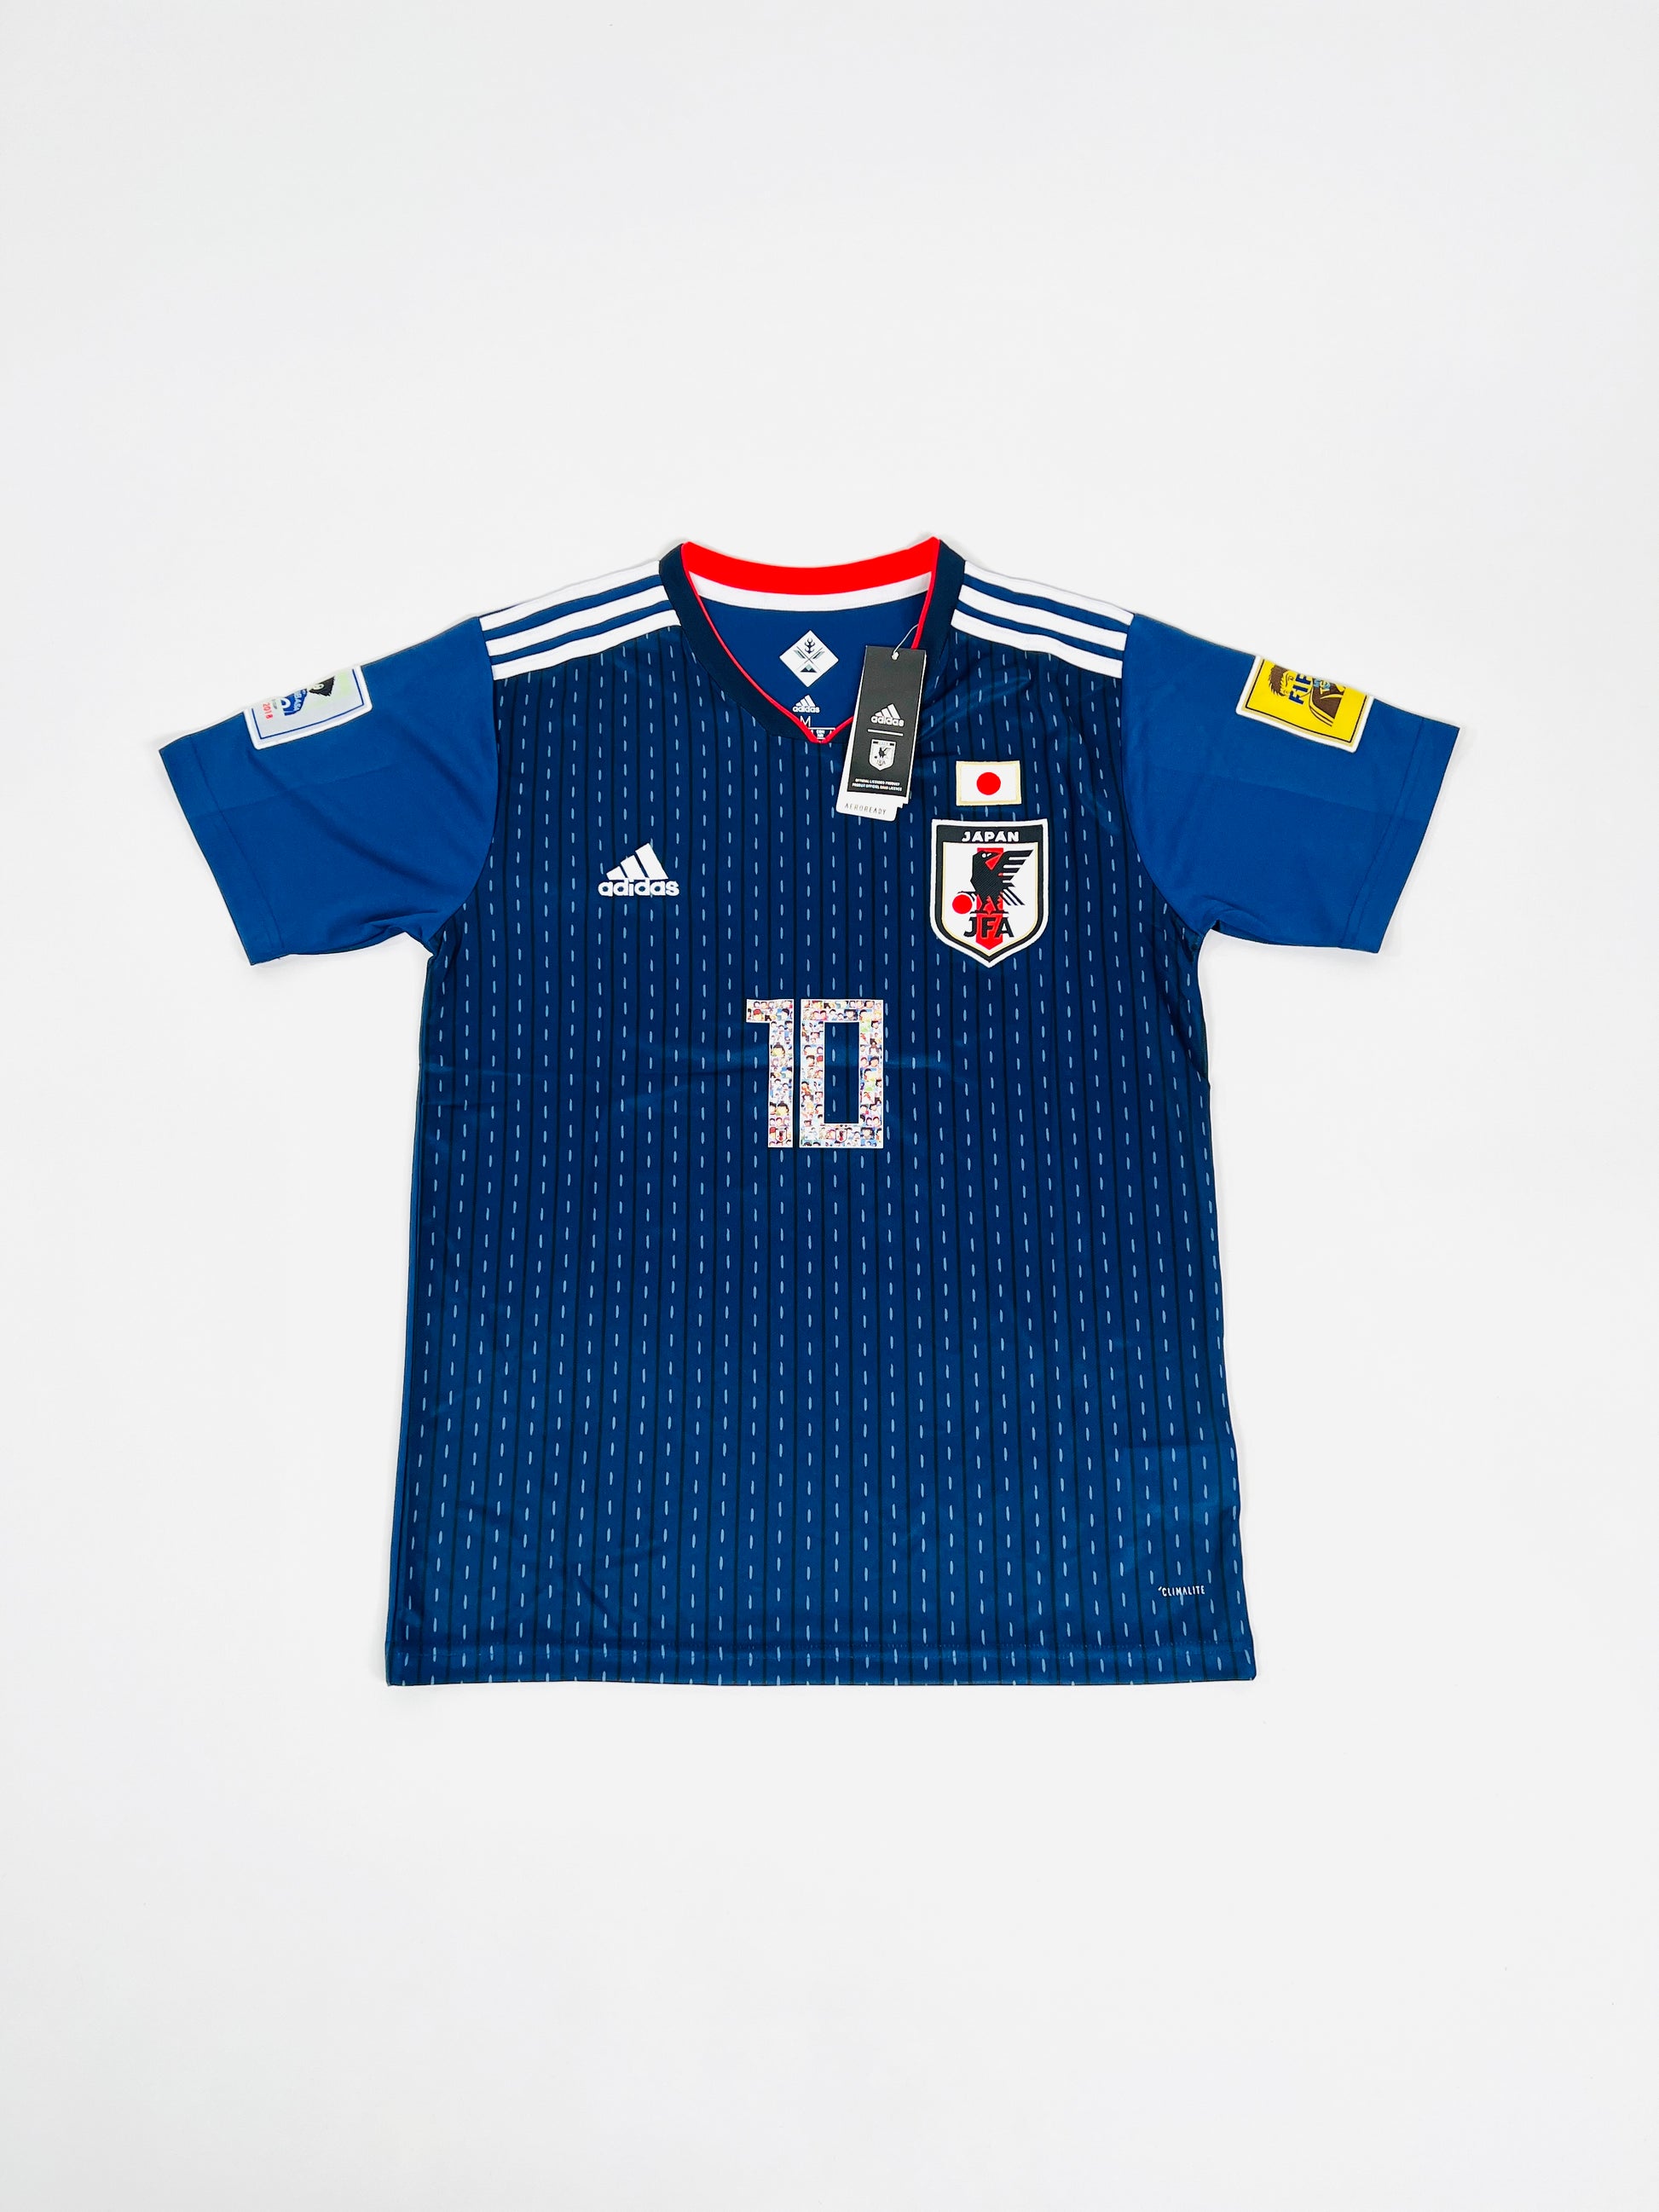 Japan Special Edition Captain soccer jersey – allaboutjerseys